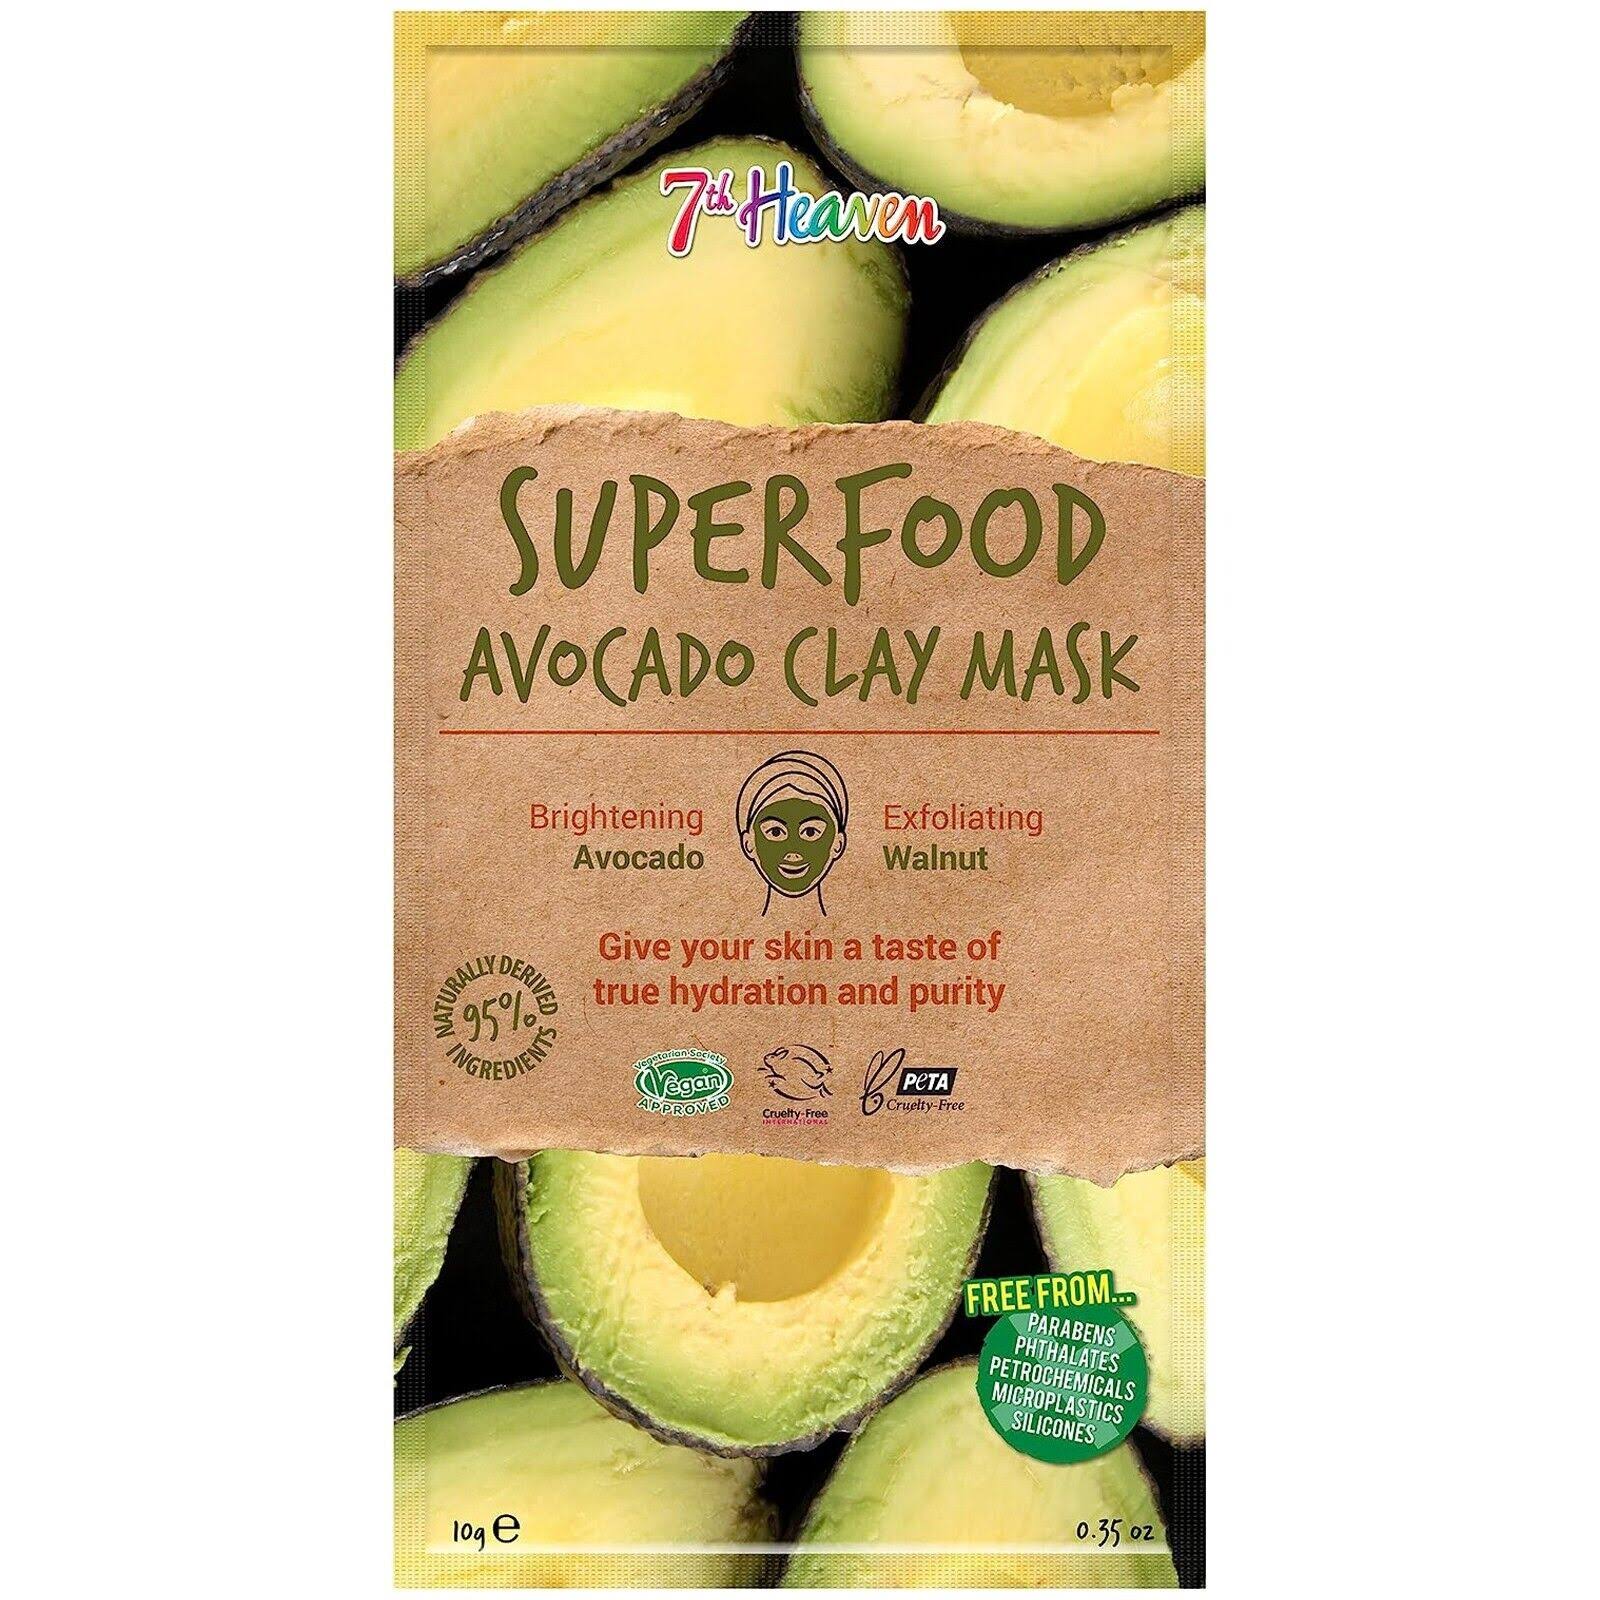 SuperFood Clay Face Mask Avocado Clay Mask 7th Heaven